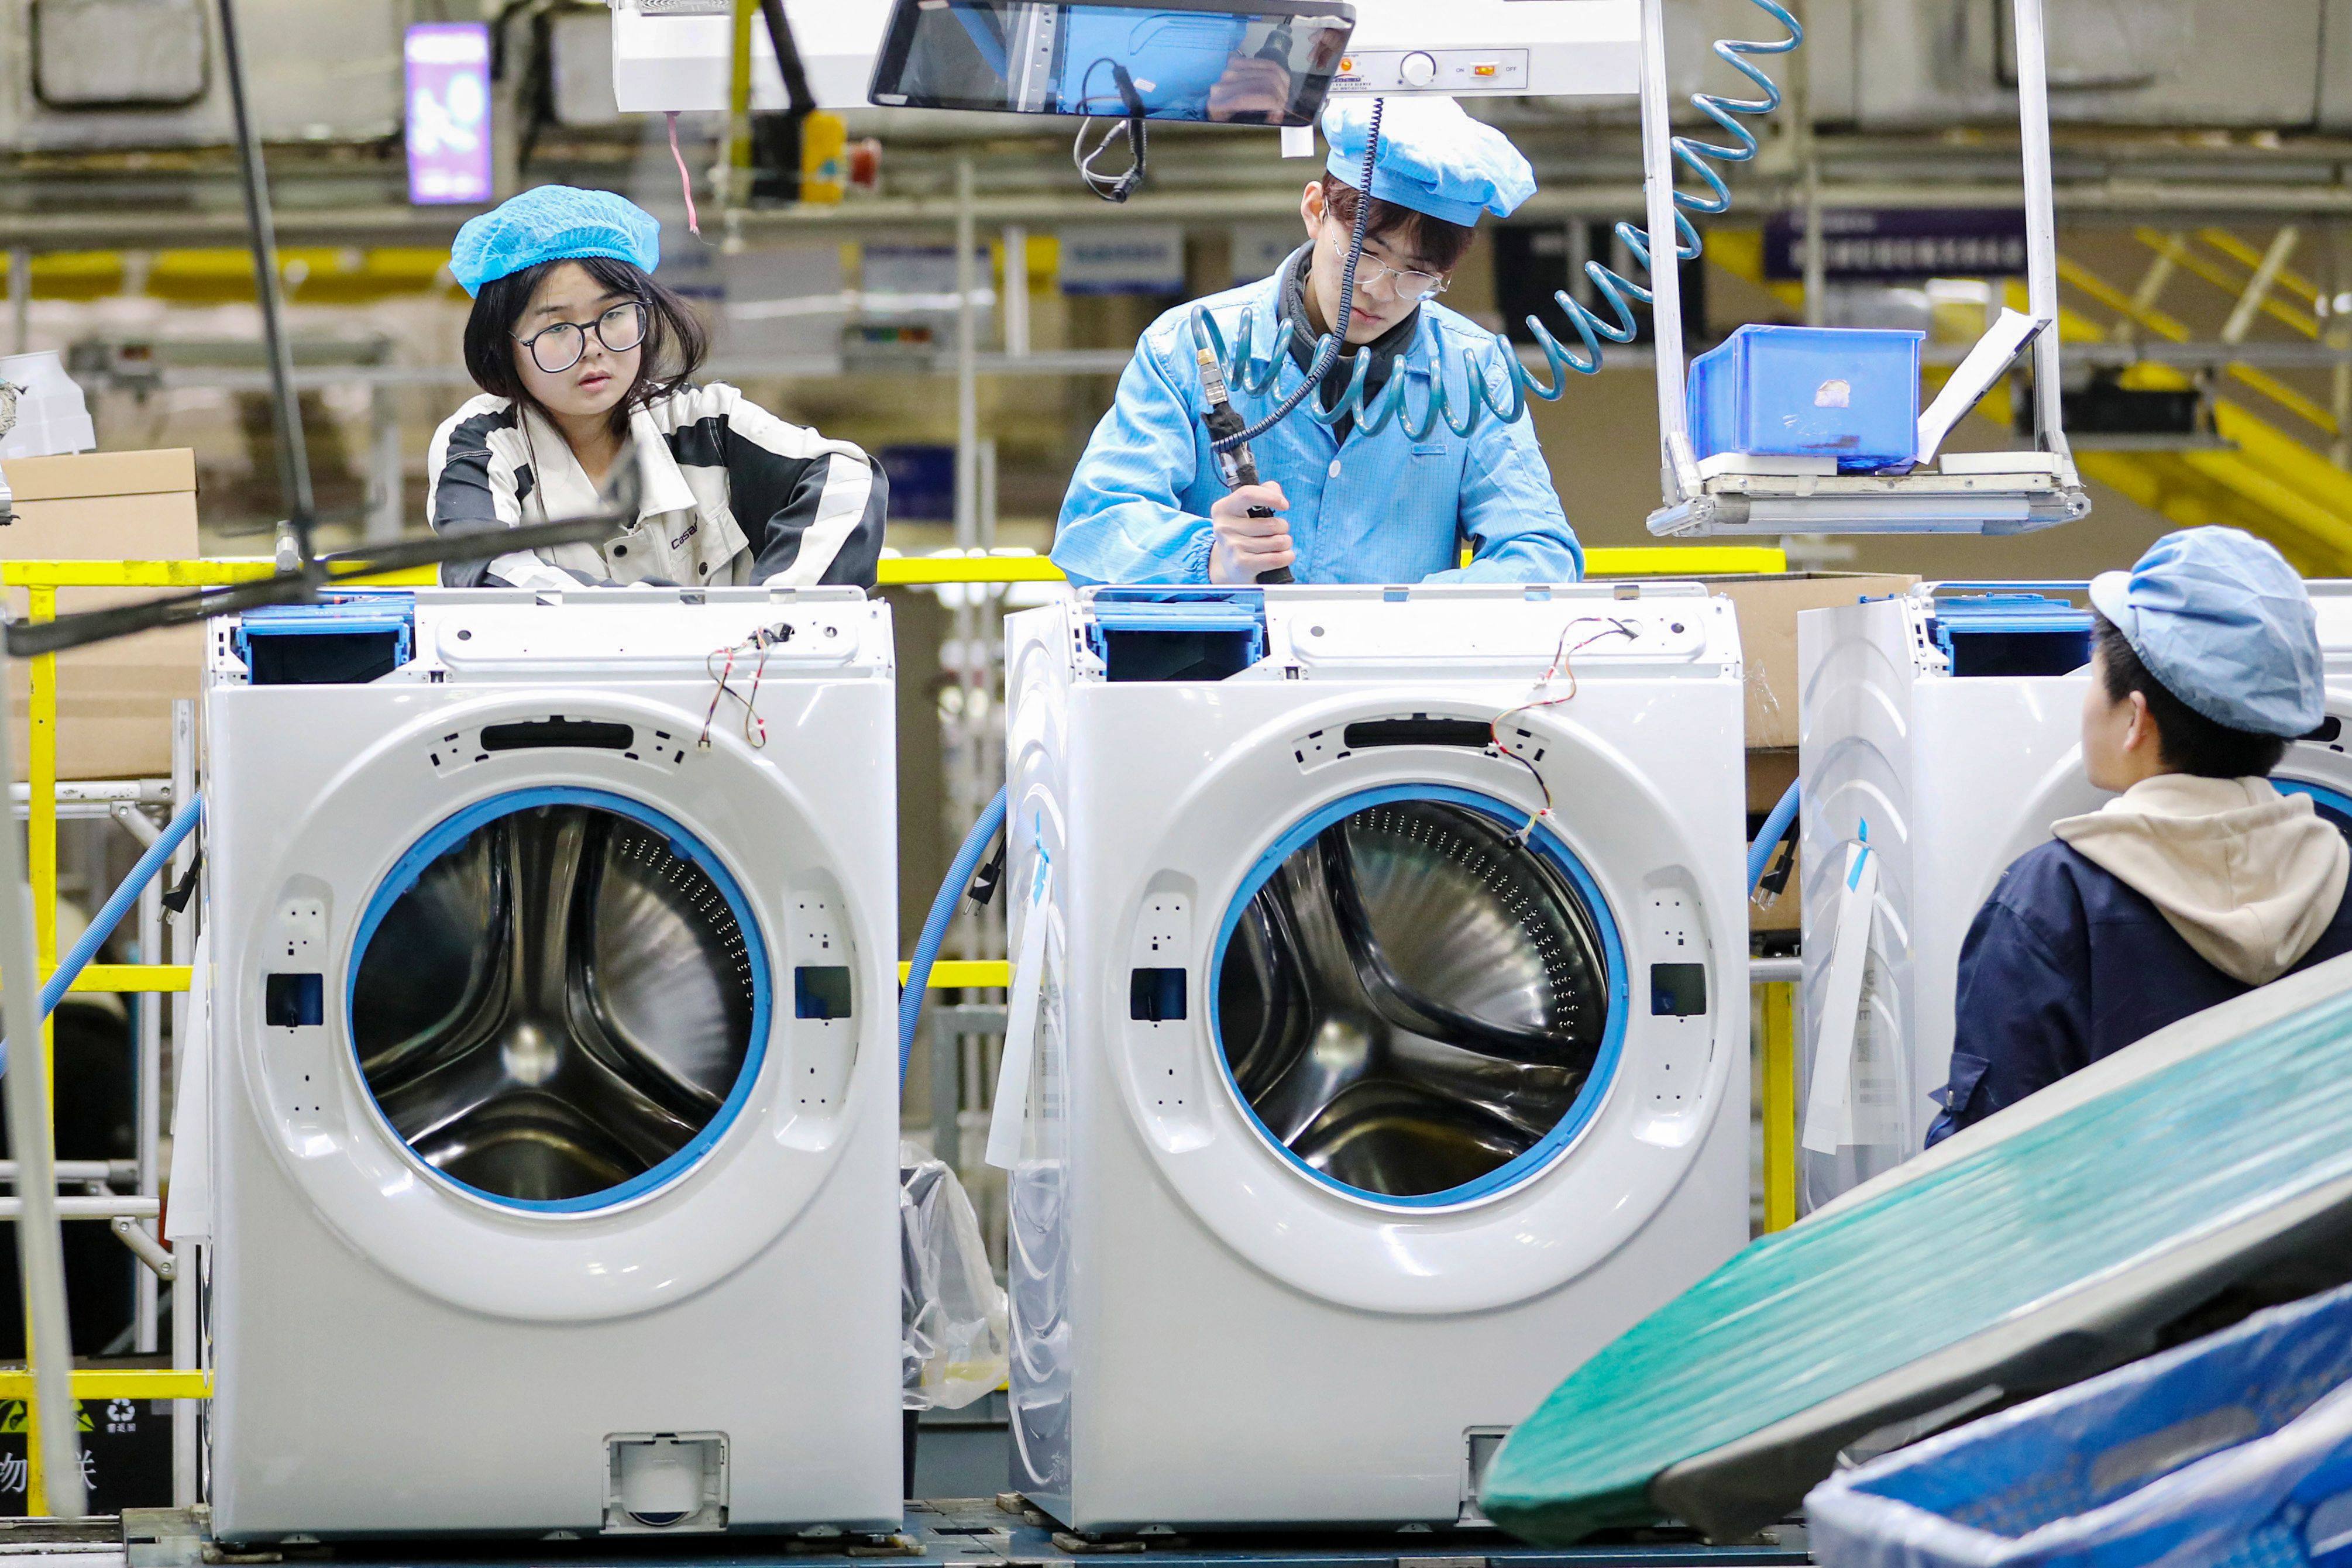 Employees work on a washing machine production line at a factory for Chinese home appliances and consumer electronics company Haier in Qingdao, in eastern China’s Shandong province on February 18, 2024. Its shares jumped after the company posted better-than-estimated full-year results. Photo:AFP